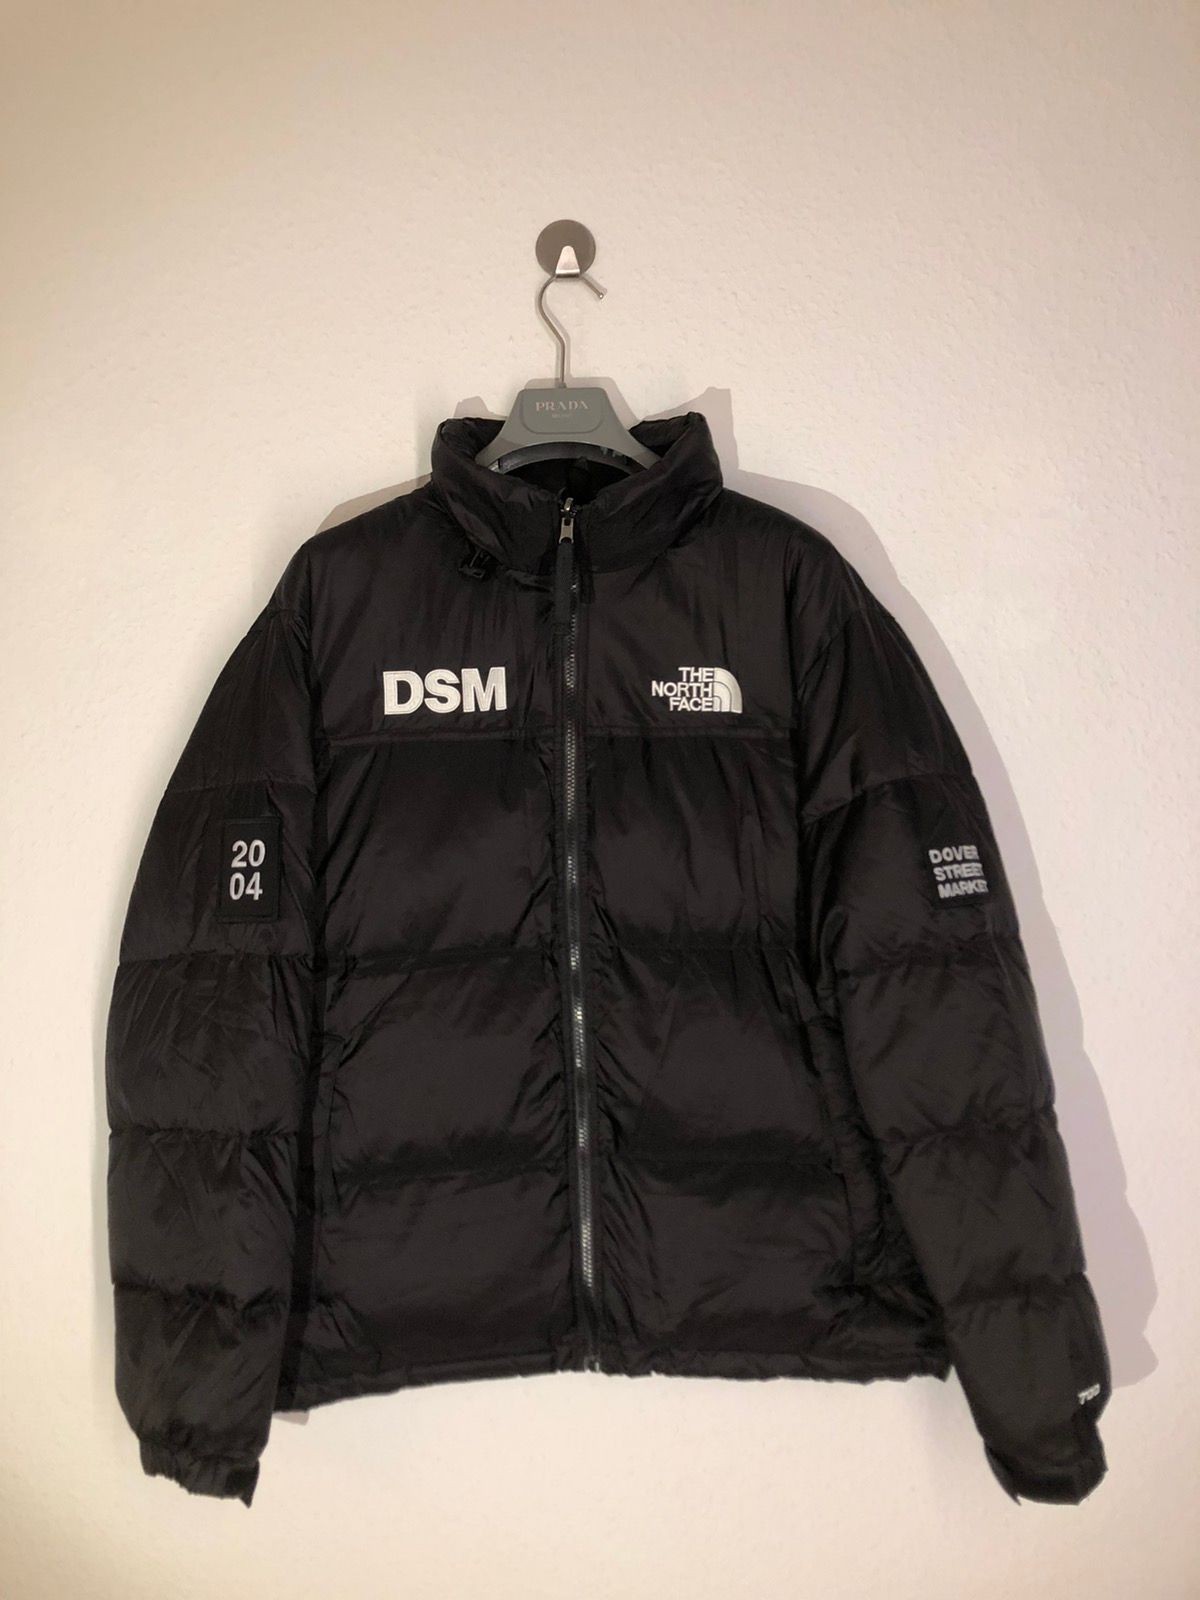 Dover Street Market × The North Face | Grailed